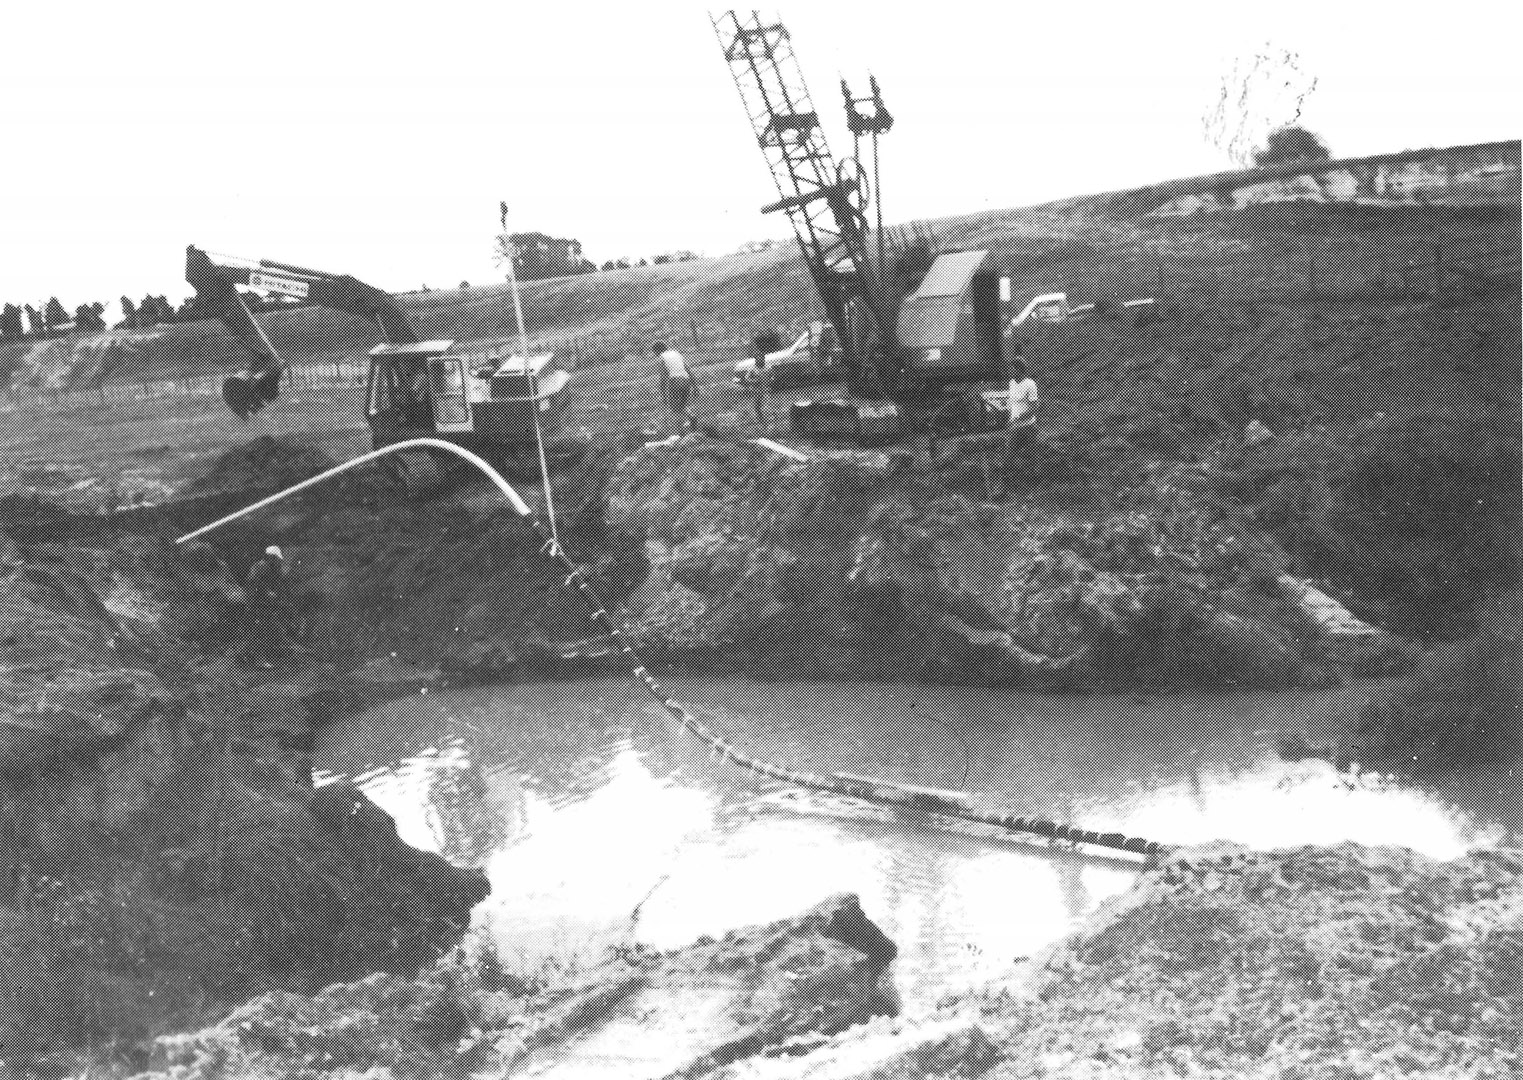 Laying the natural gas pipeline over the Waitakaruru Stream on Barry Geange's farm in 1982.